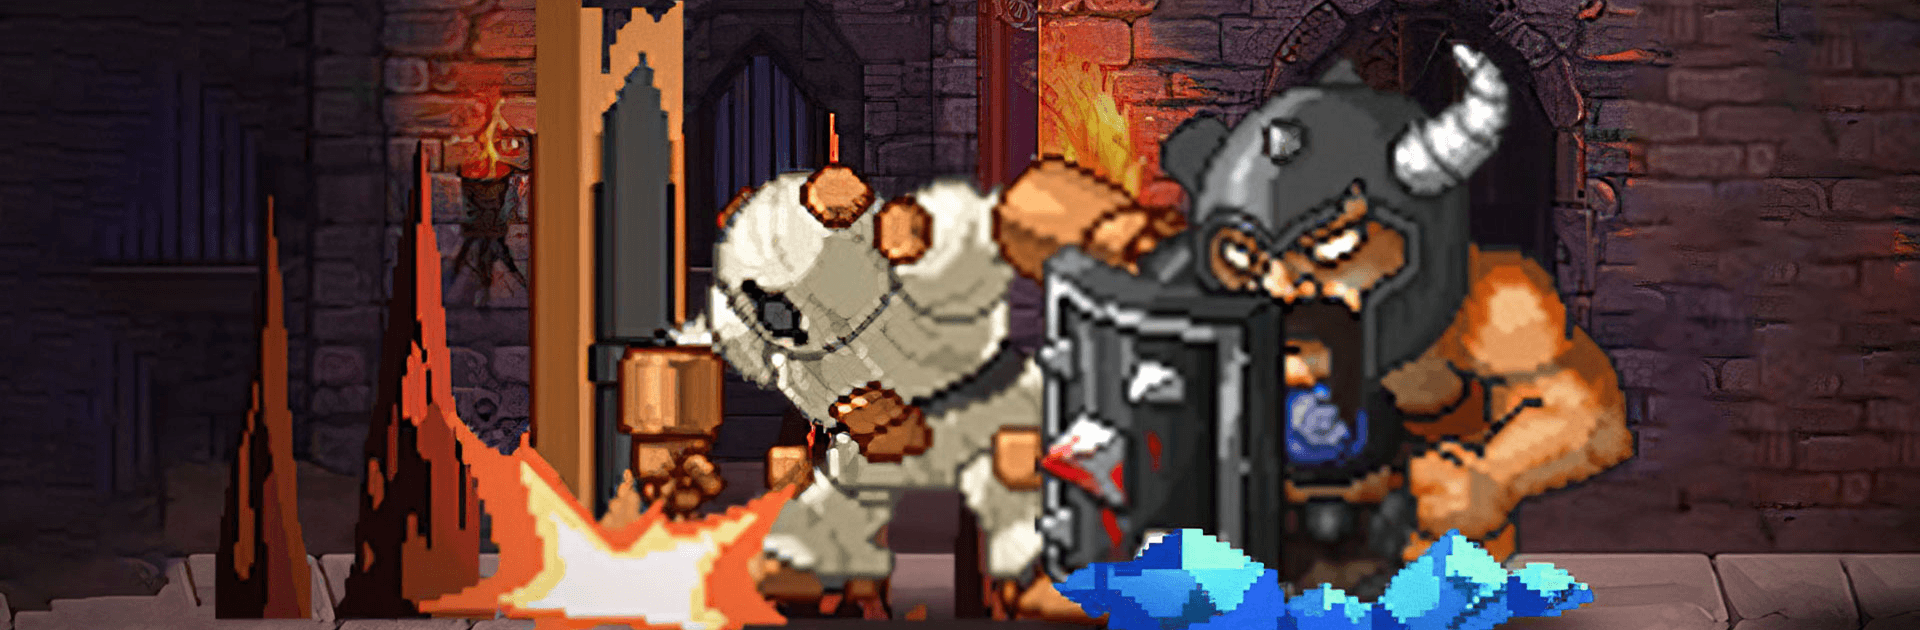 Play Iron knight : Nonstop Idle RPG Online